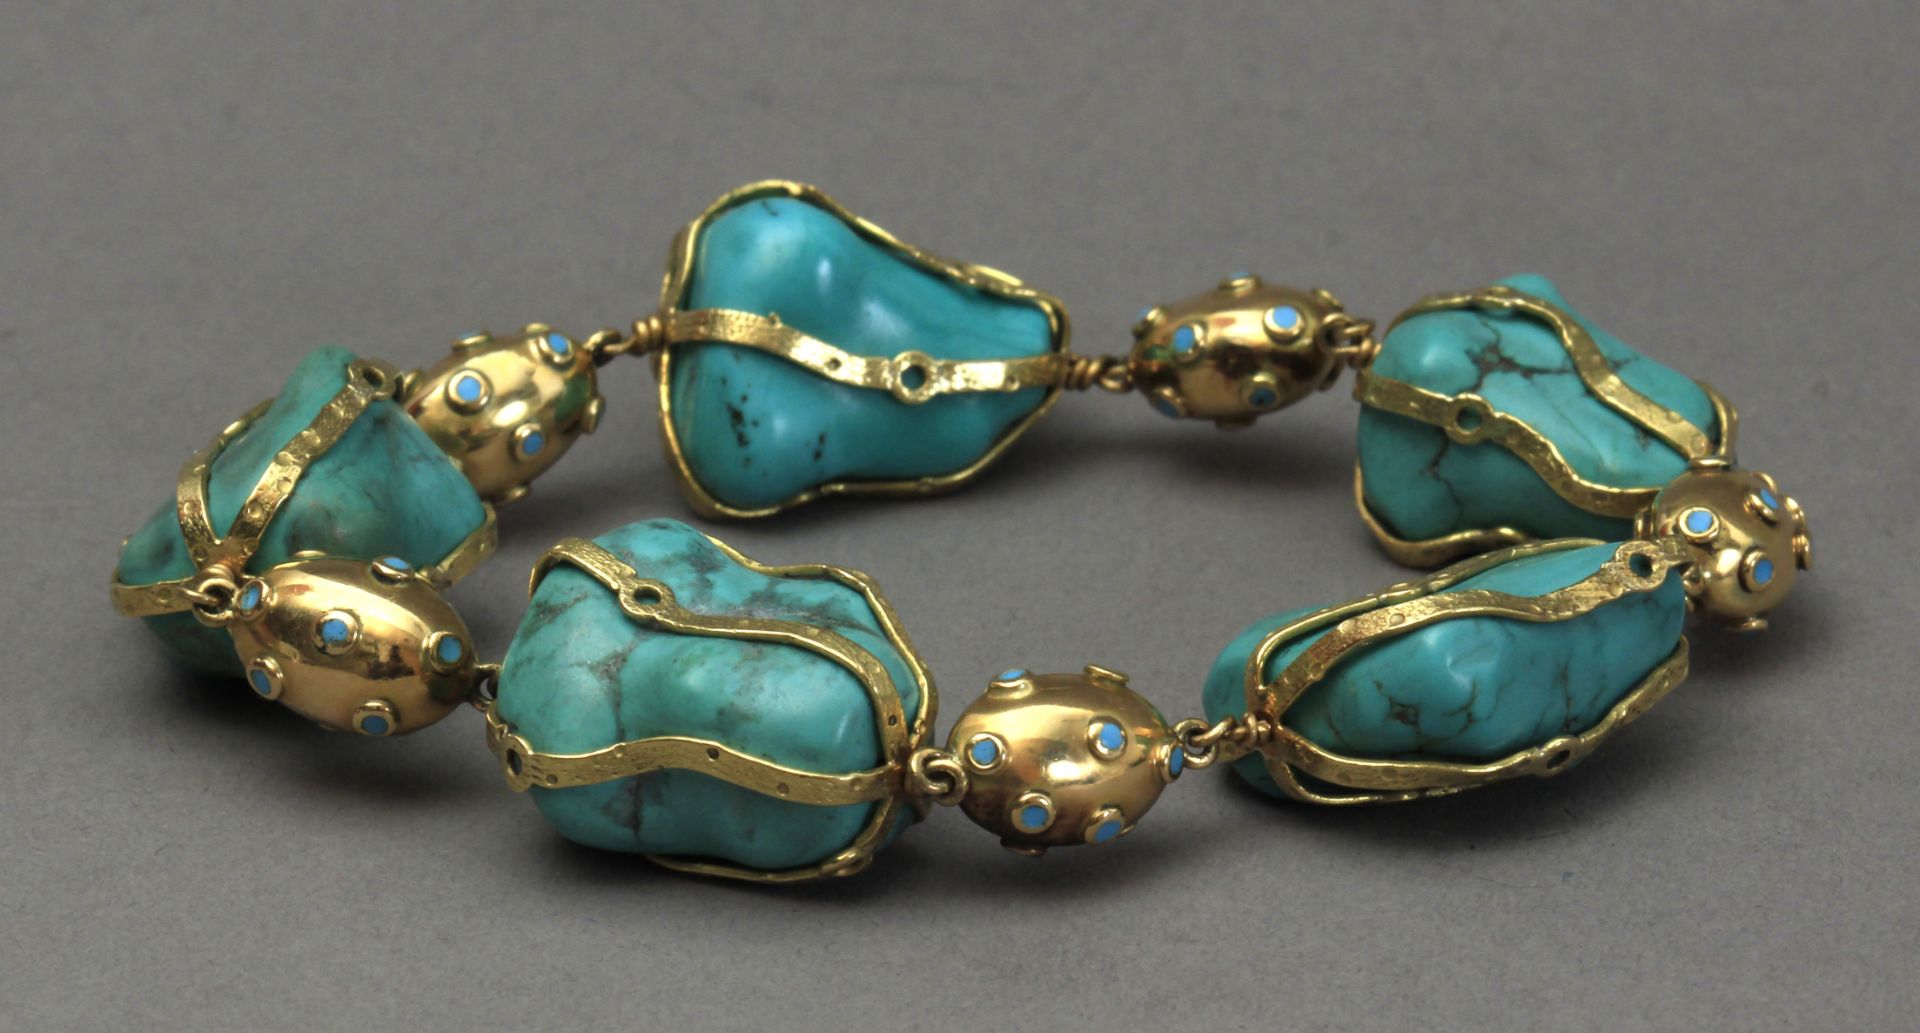 A rough turquoise beads and 18k. yellow gold bracelet - Image 2 of 3